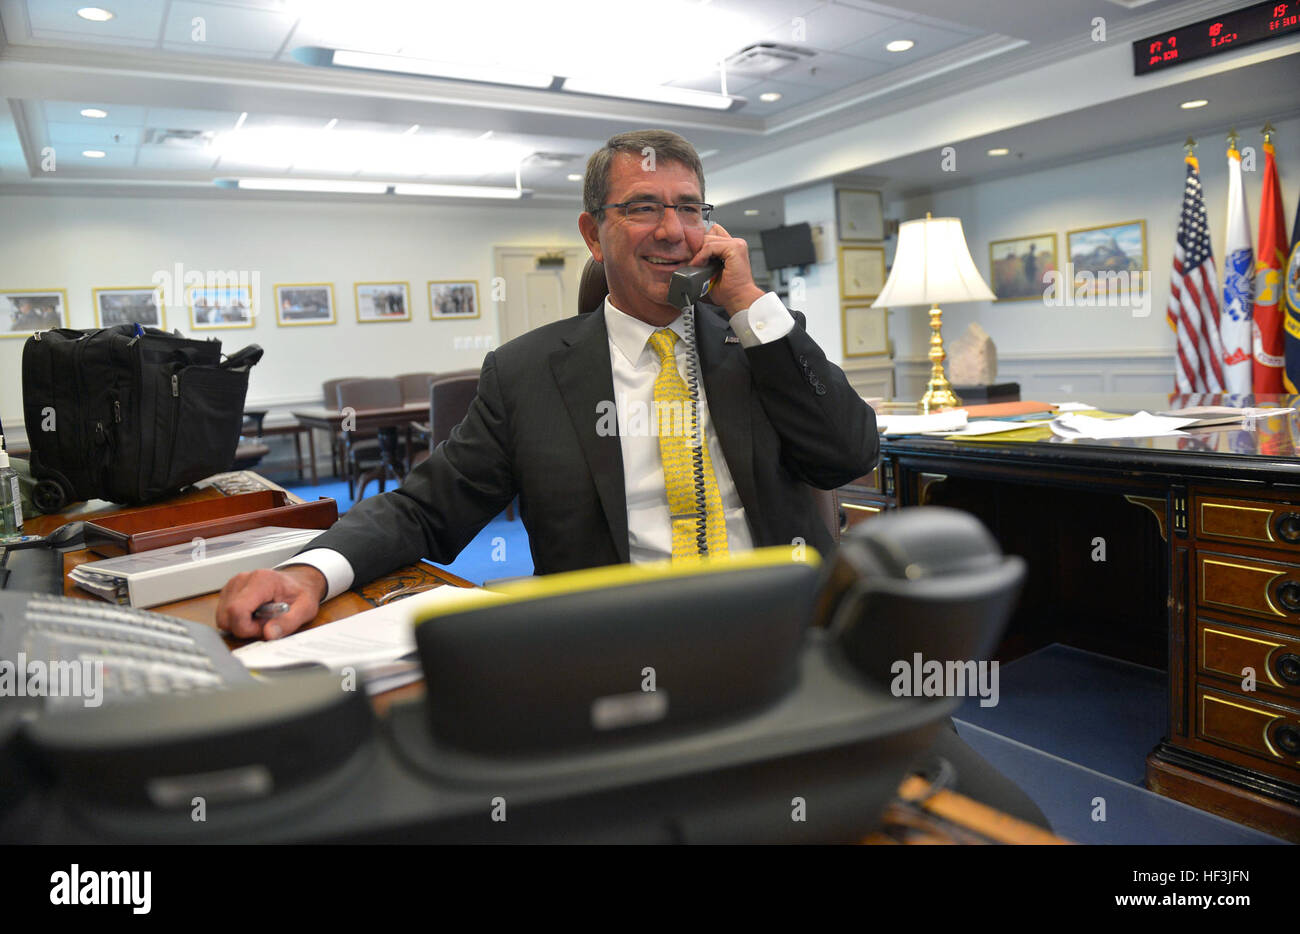 Secretary of Defense Ash Carter speaks by phone with Army 1st Lt. Shaye Haver and 1st Lt. Kristen Griest to congratulate the two for their recent graduation from the rigorous Army Ranger School from his office at the Pentagon, Aug. 20, 2015. Haver and Griest are the first women to successfully complete the course after the Army began allowing women to participate in the elite program. (DOD Photo by Glenn Fawcett/Released) Secretary of defense congratulates first women to graduate from US Army Ranger School 150820-D-NI589-054 Stock Photo